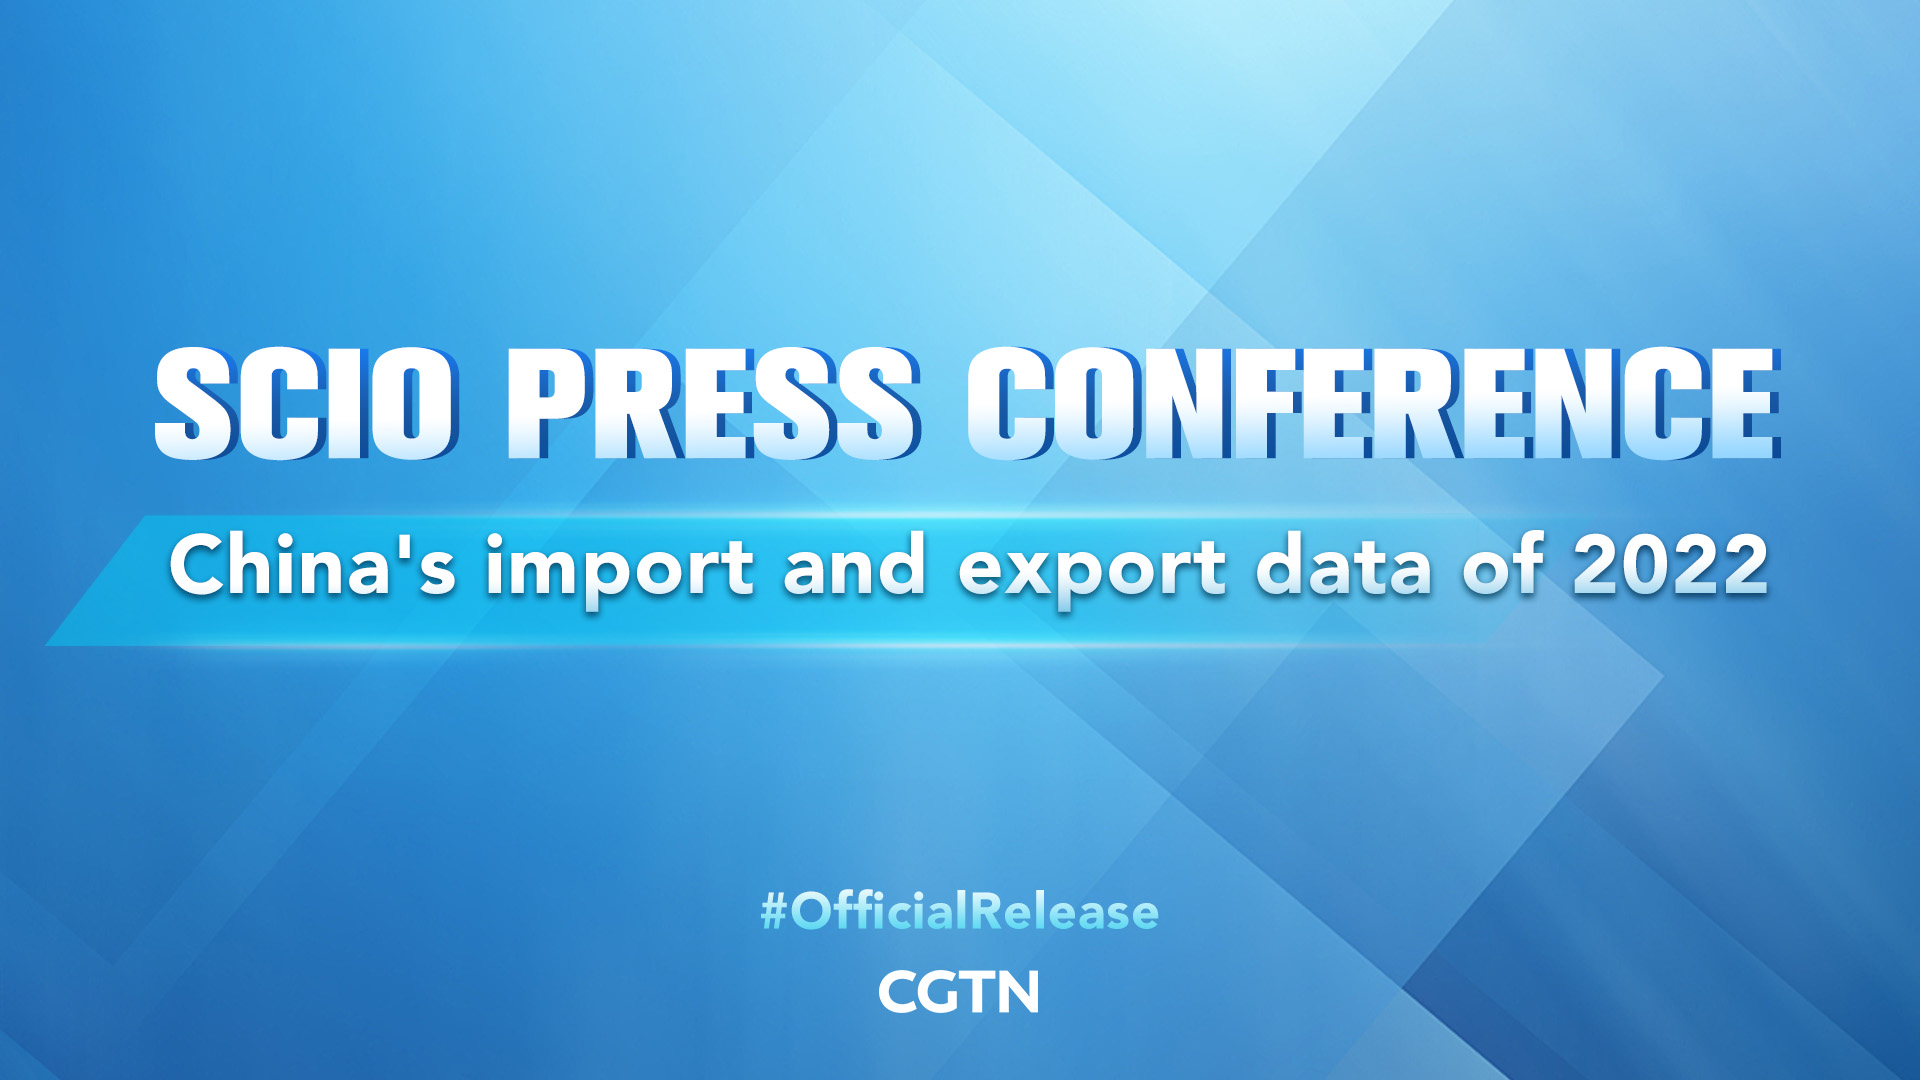 Live: Press conference on China's import and export data of 2022